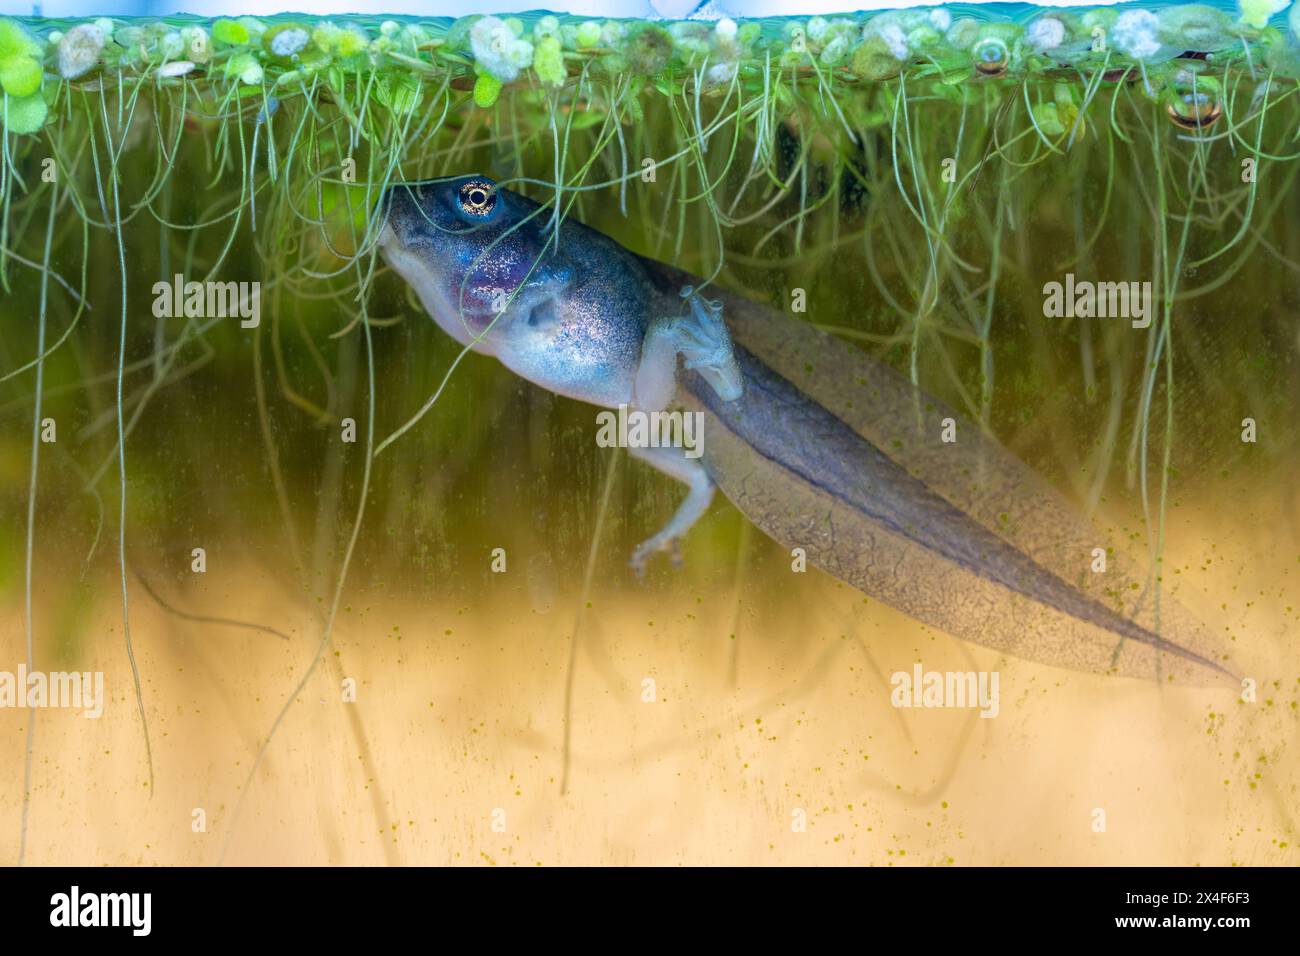 Issaquah, Washington State, USA. Pacific tree frog tadpole with hind legs eating duckweed in an aquarium. Stock Photo